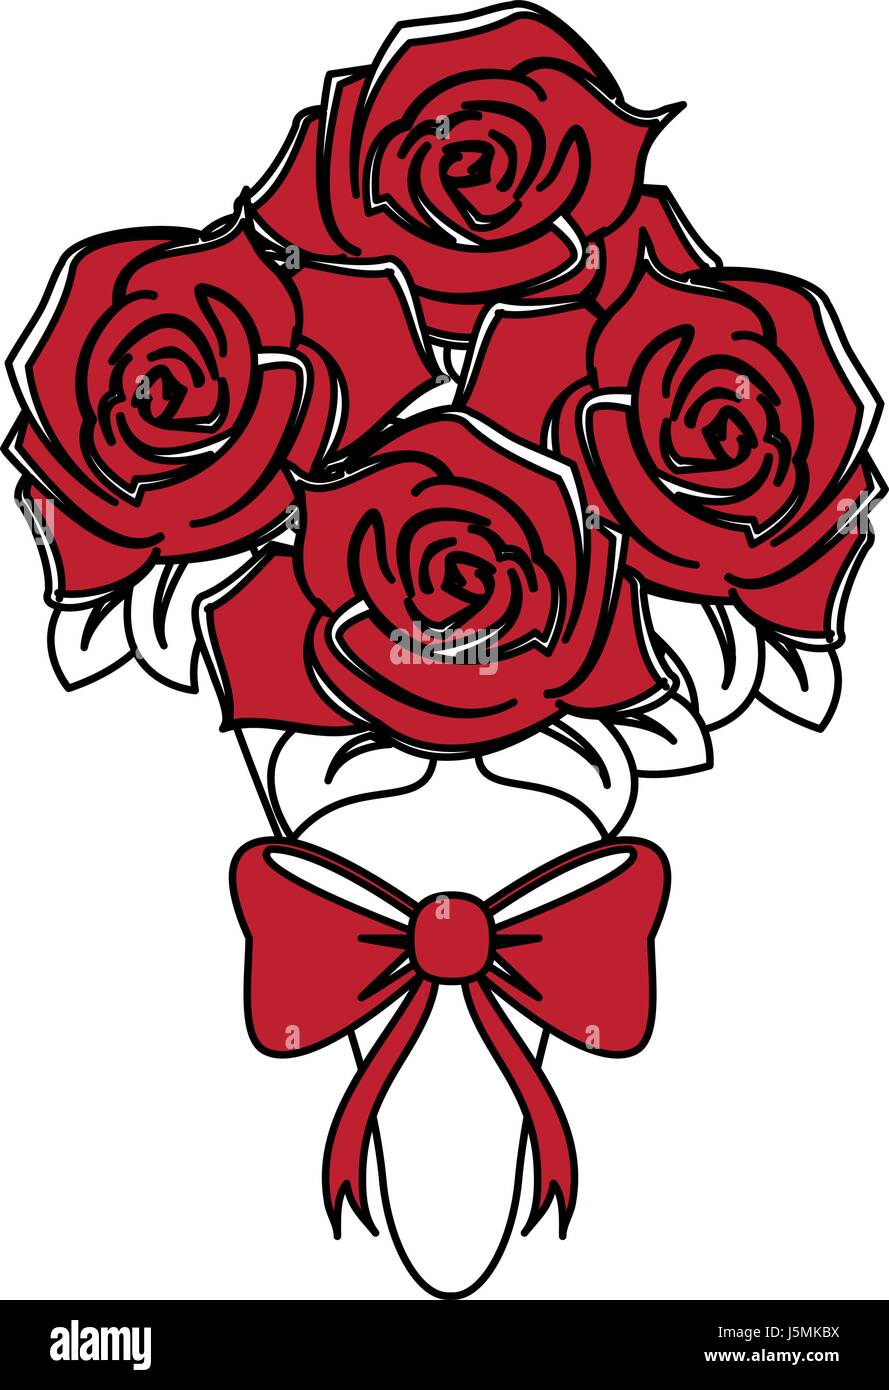 color silhouette image wedding bouquet of red roses with bow Stock Vector